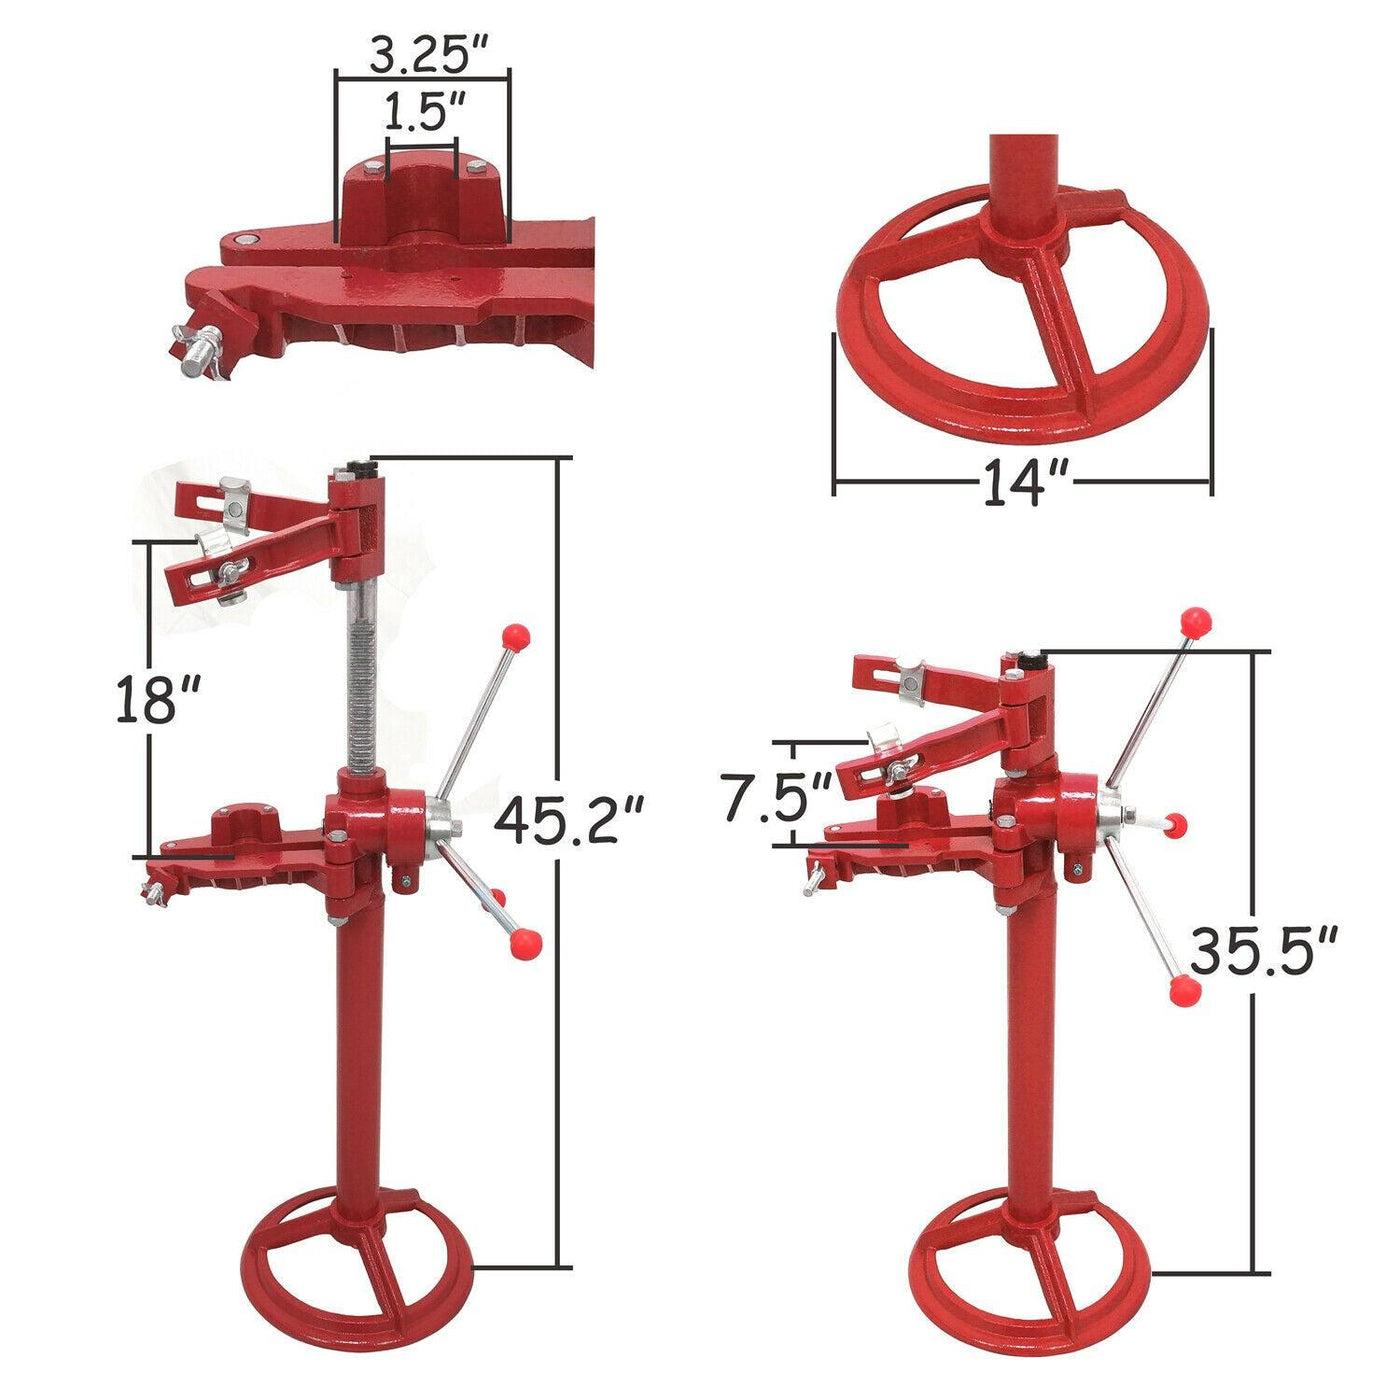 Auto Spring Compressor Hand Operate 20 Inch Max.Height Strut Coil Spring Press - Moto Life Products